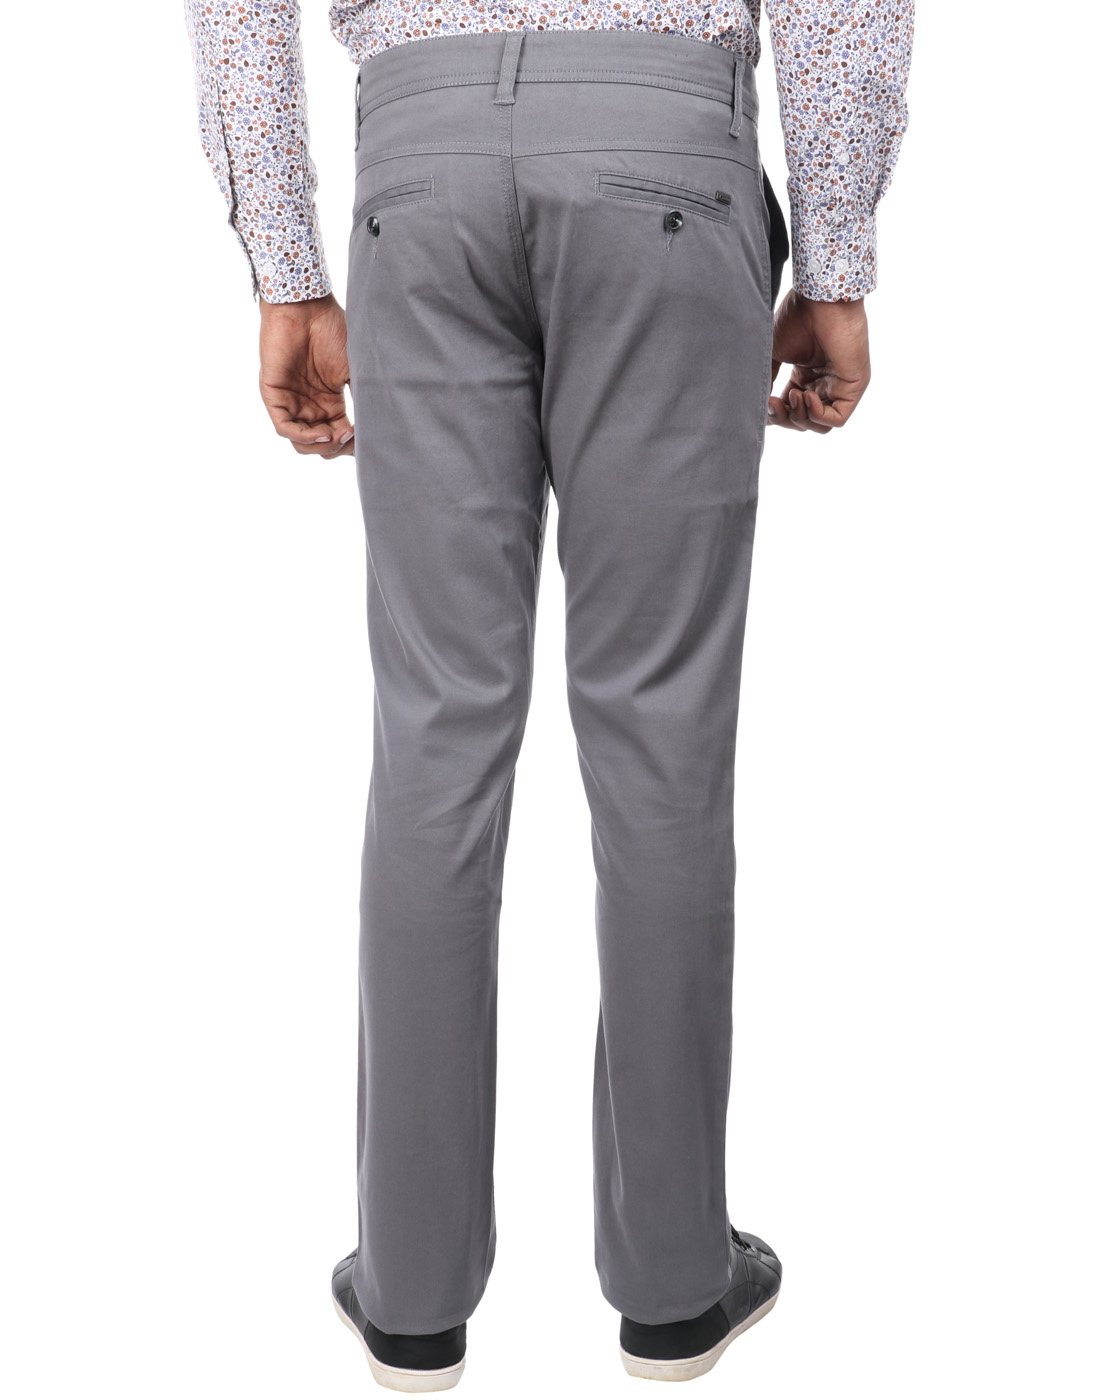 Buy Oxemberg Slim Fit Mens Grey Cotton Trouser Online @ ₹1359 from ...